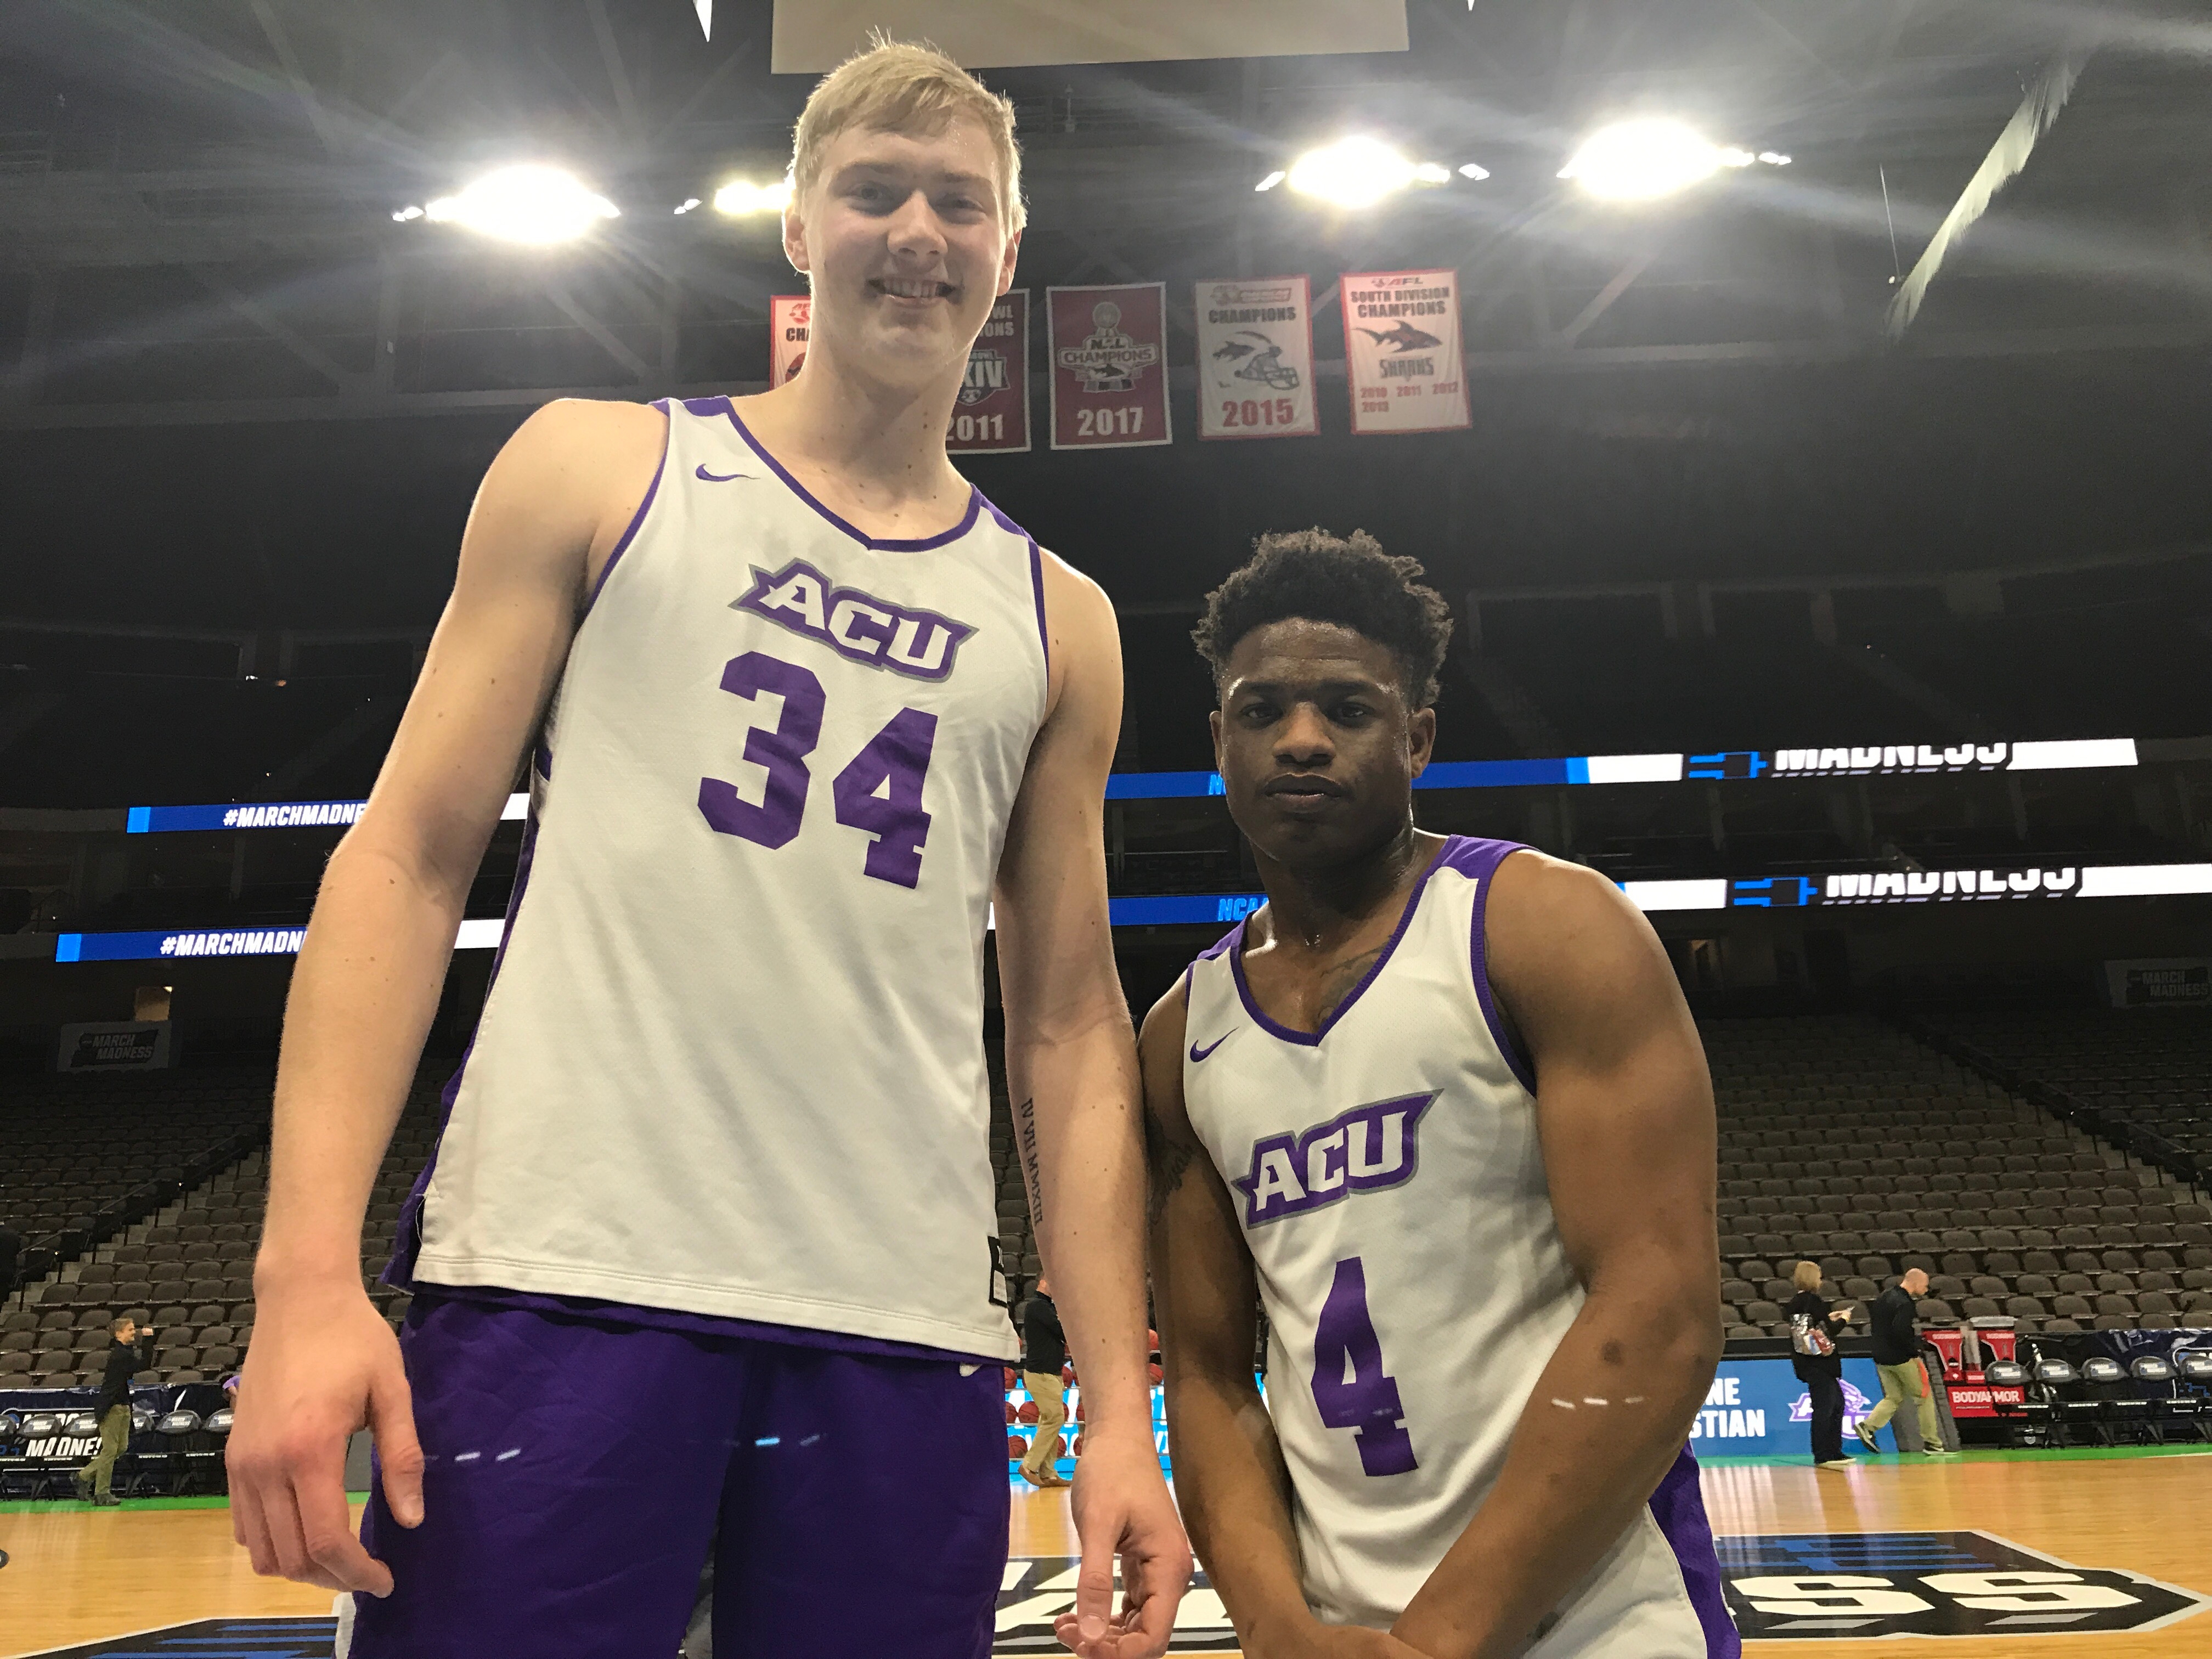 Kohl (left) and Daniels pause at the end of ACU’s first practice at VyStar Veterans Memorial Arena in Jacksonville, Florida.